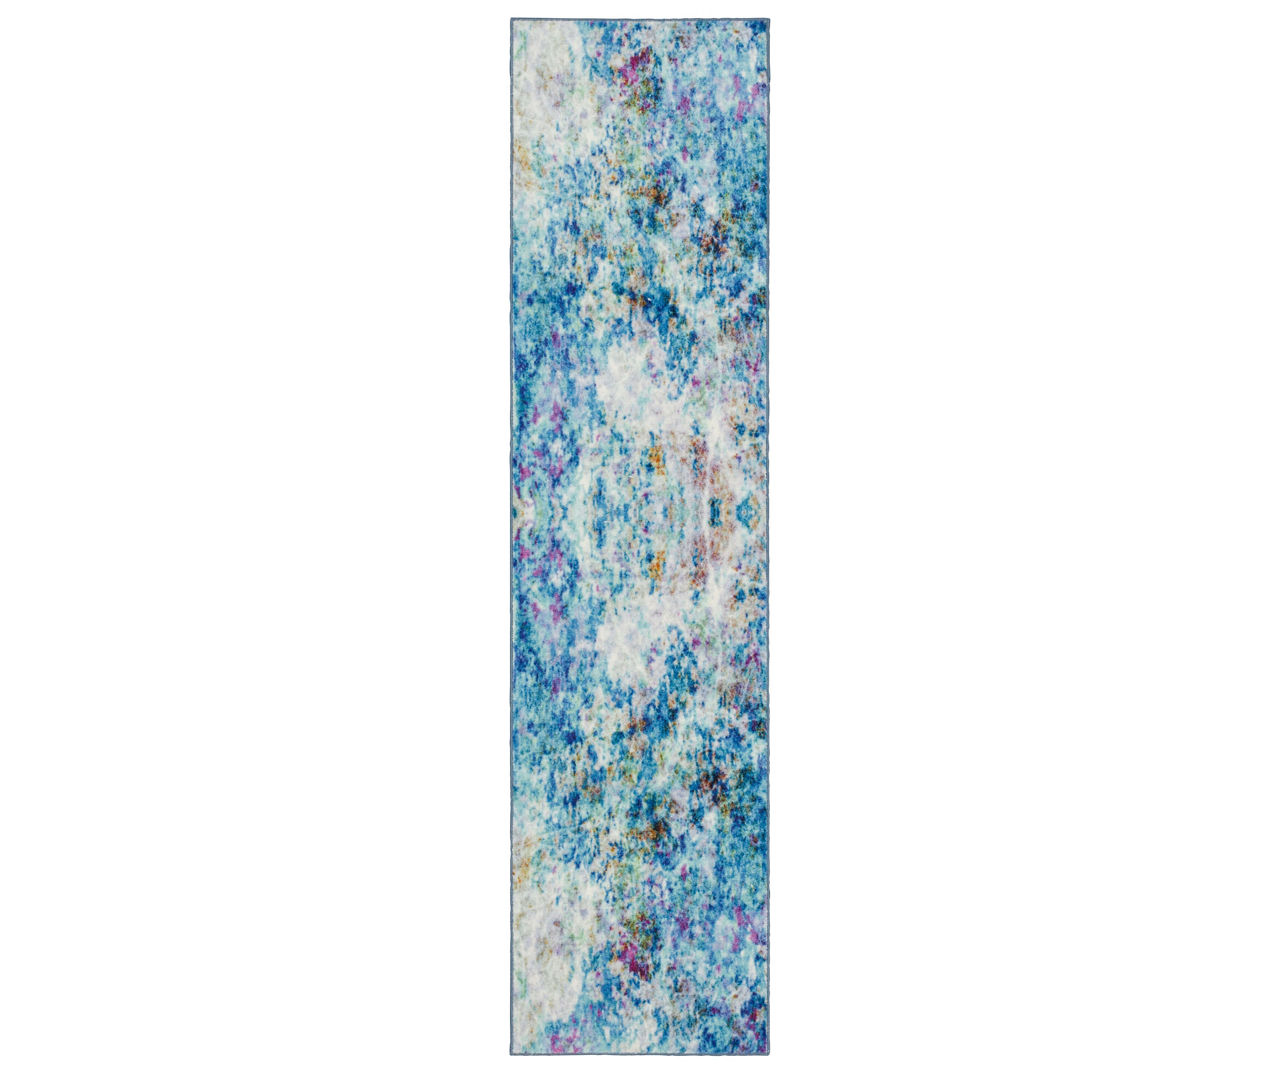 Mohawk Art Explosion Blue & White Abstract Area Rug, (4' x 6') | Big Lots